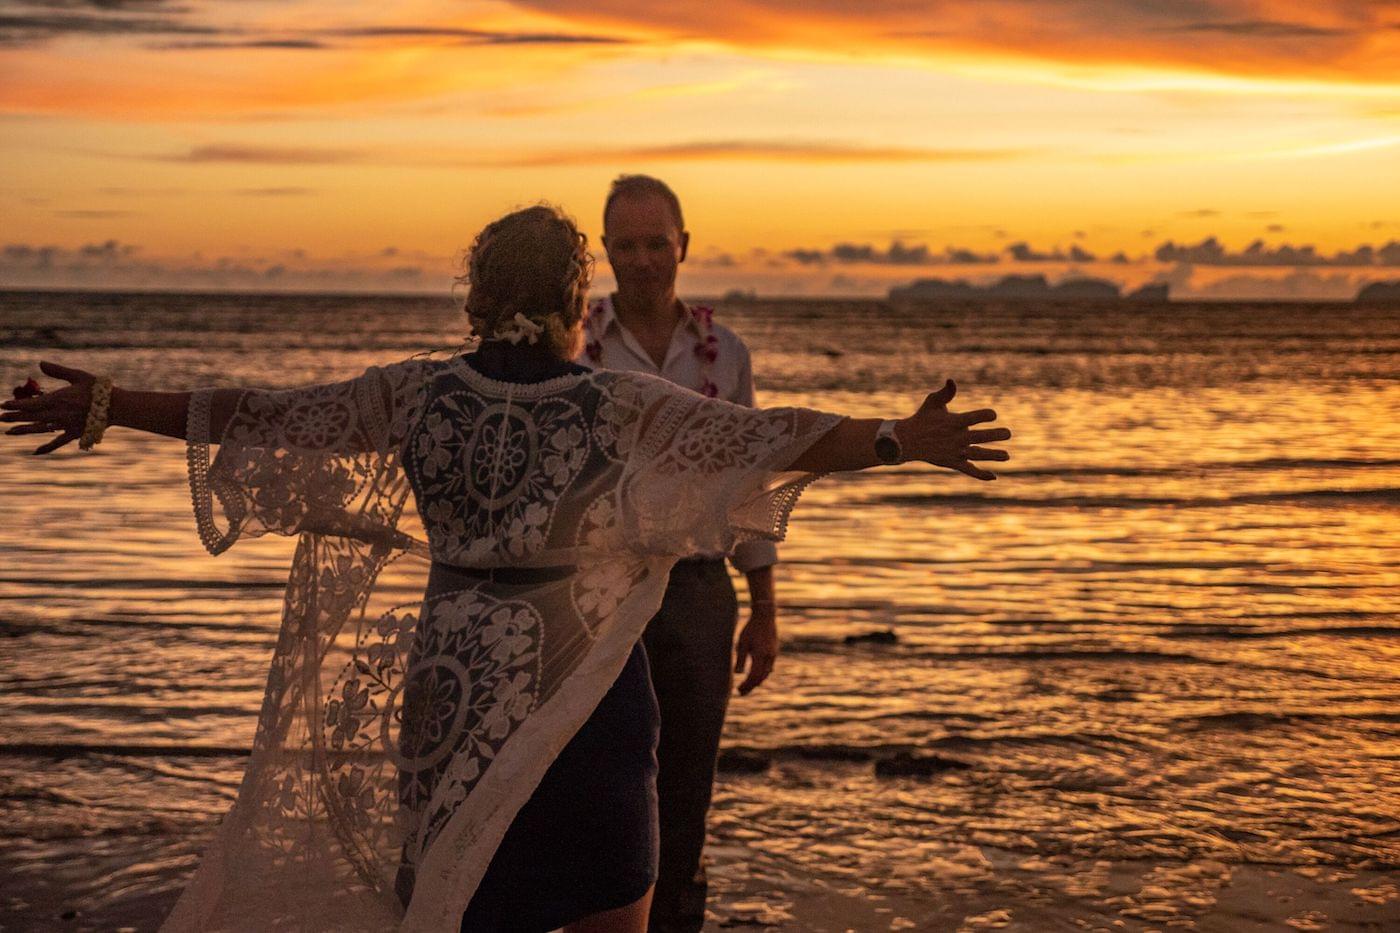 Bride and goom celebrating on beach at sunset